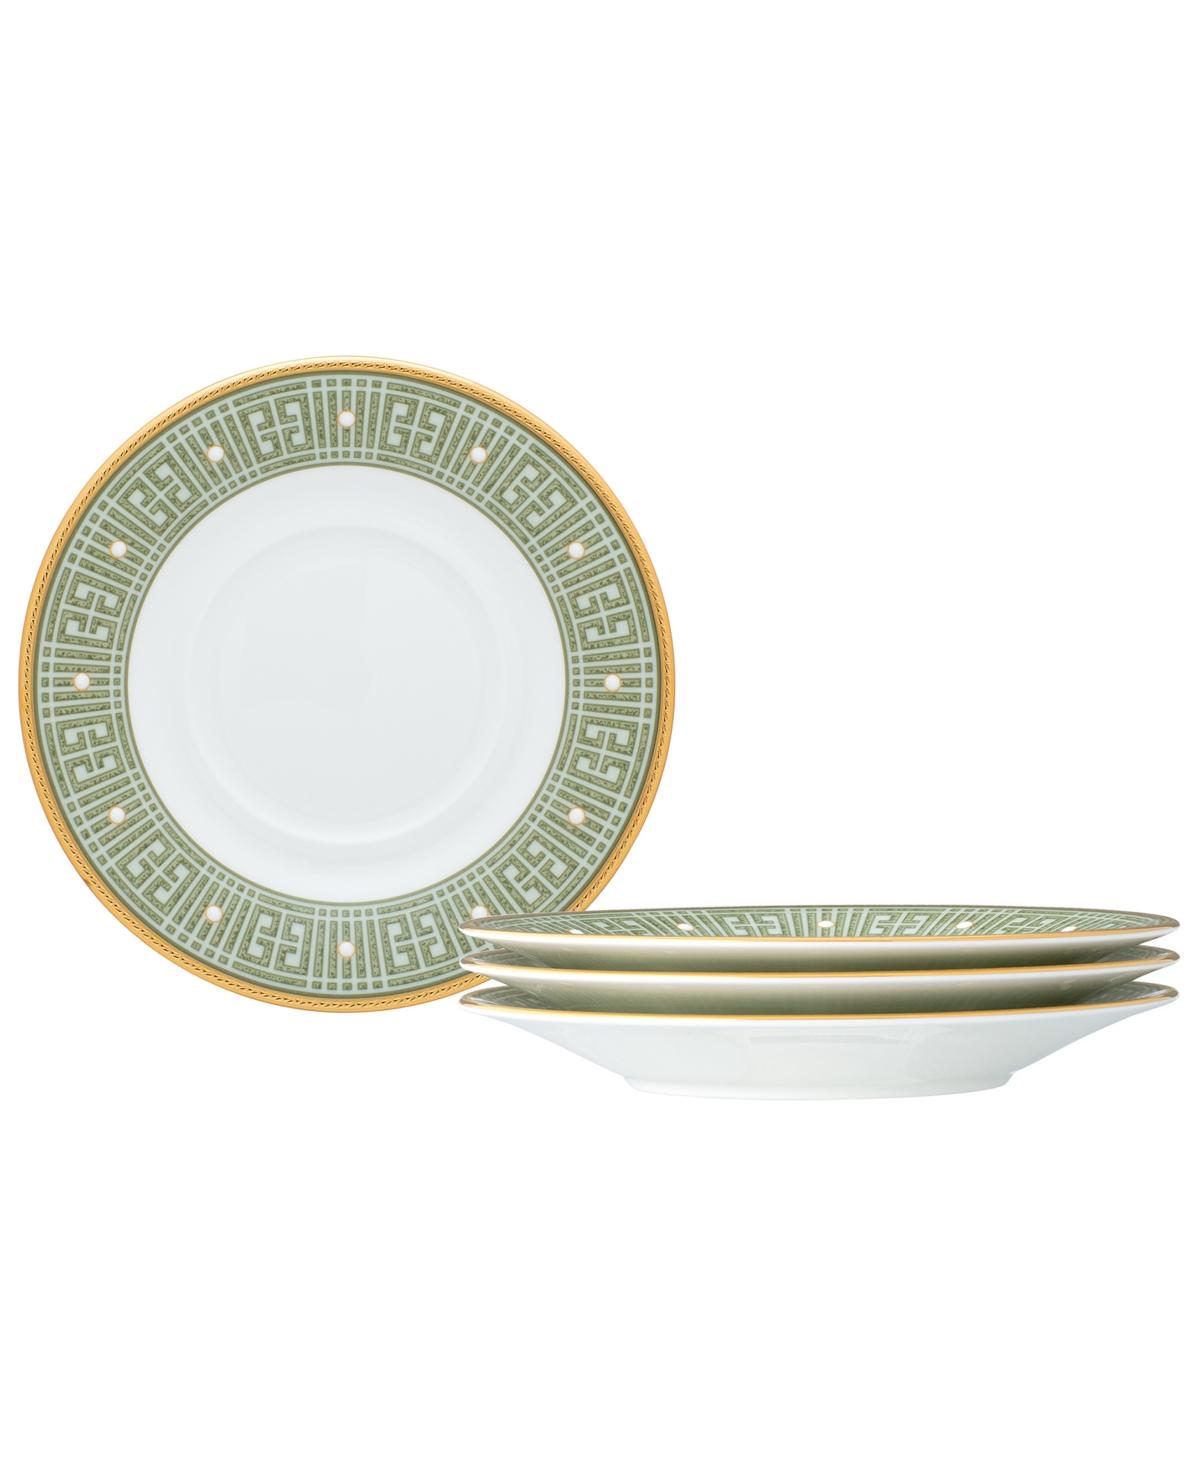 Noritake Infinity 4 Piece Saucer Set, Service For 4 In Green Gold